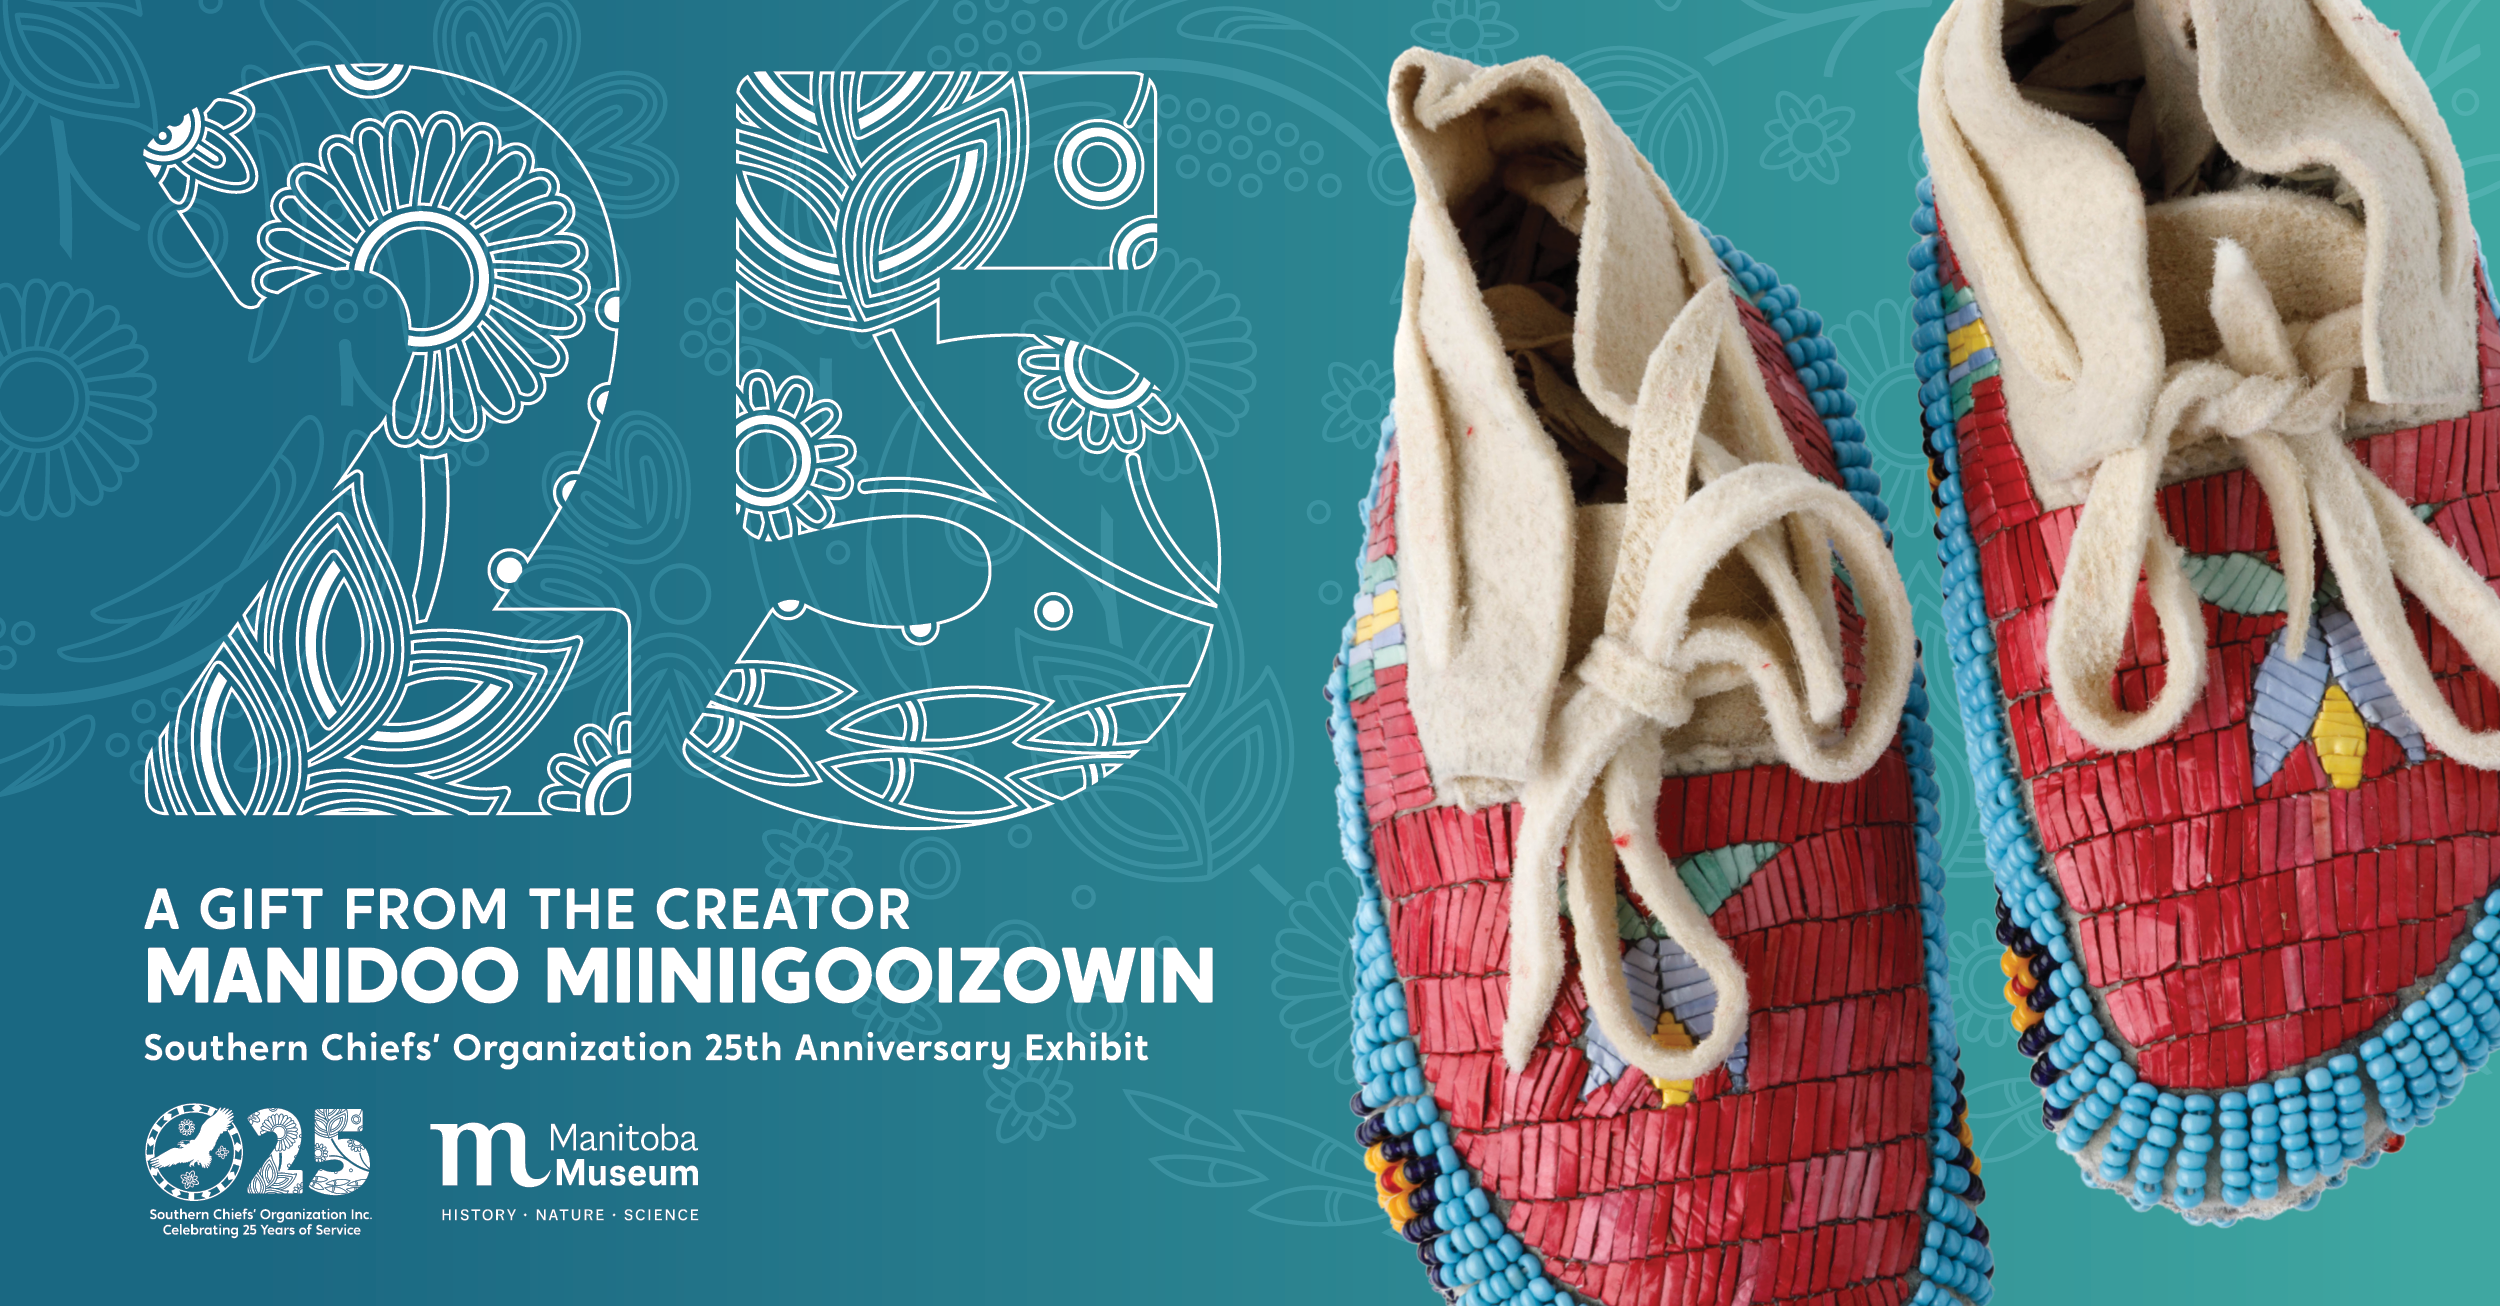 A promo image for exhibit 'Manidoo Miiniigooizowin: A Gift from the Creator'. On a bright blue background to the left, below a large 